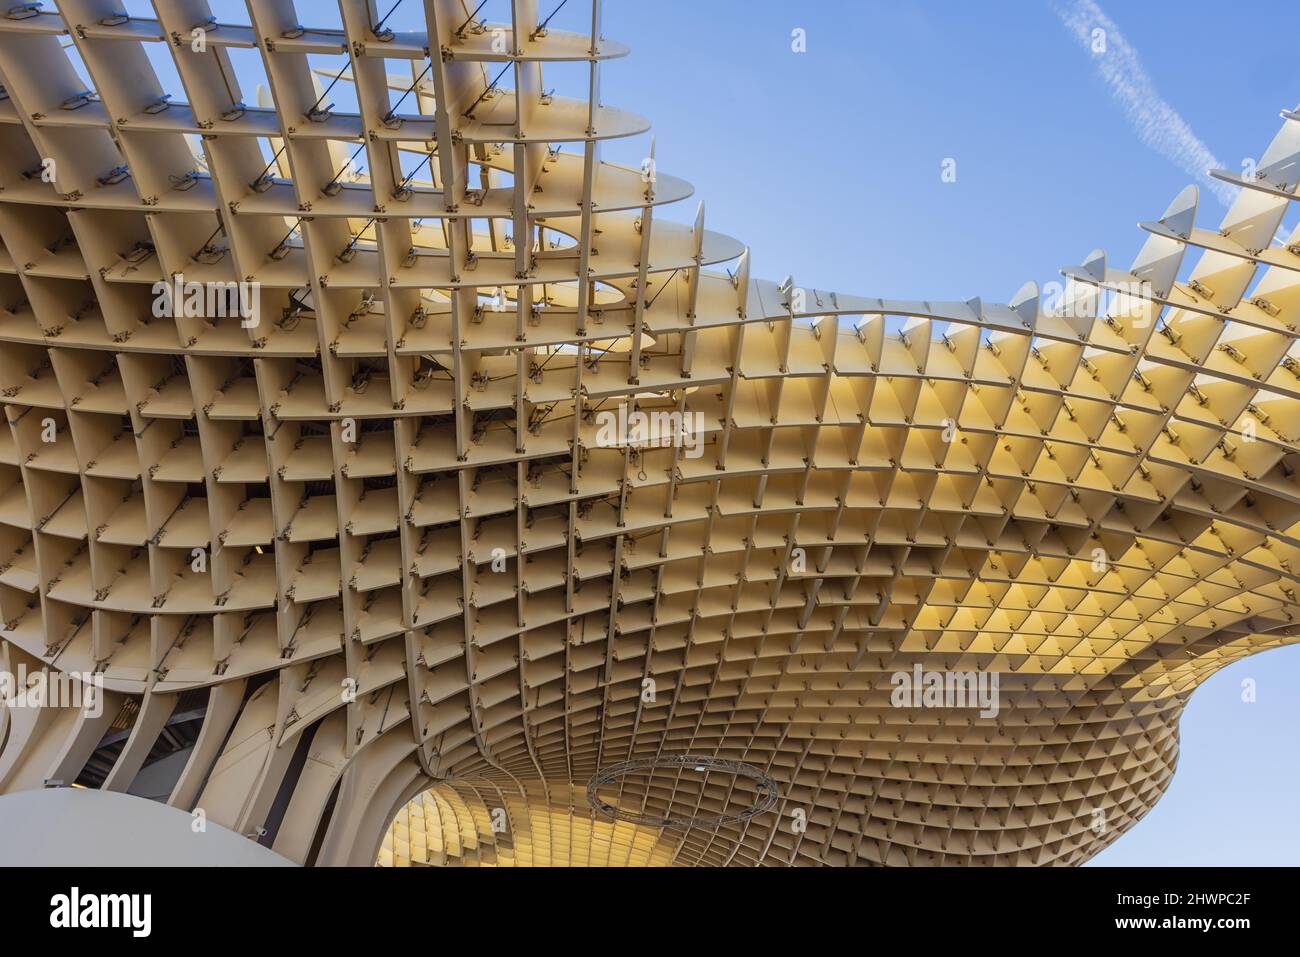 Editorial: SEVILLE, ANDALUSIA, SPAIN, OCTOBER 10, 2021 - Looking at the roof structure of Metropol Parasol seen from the street level Stock Photo